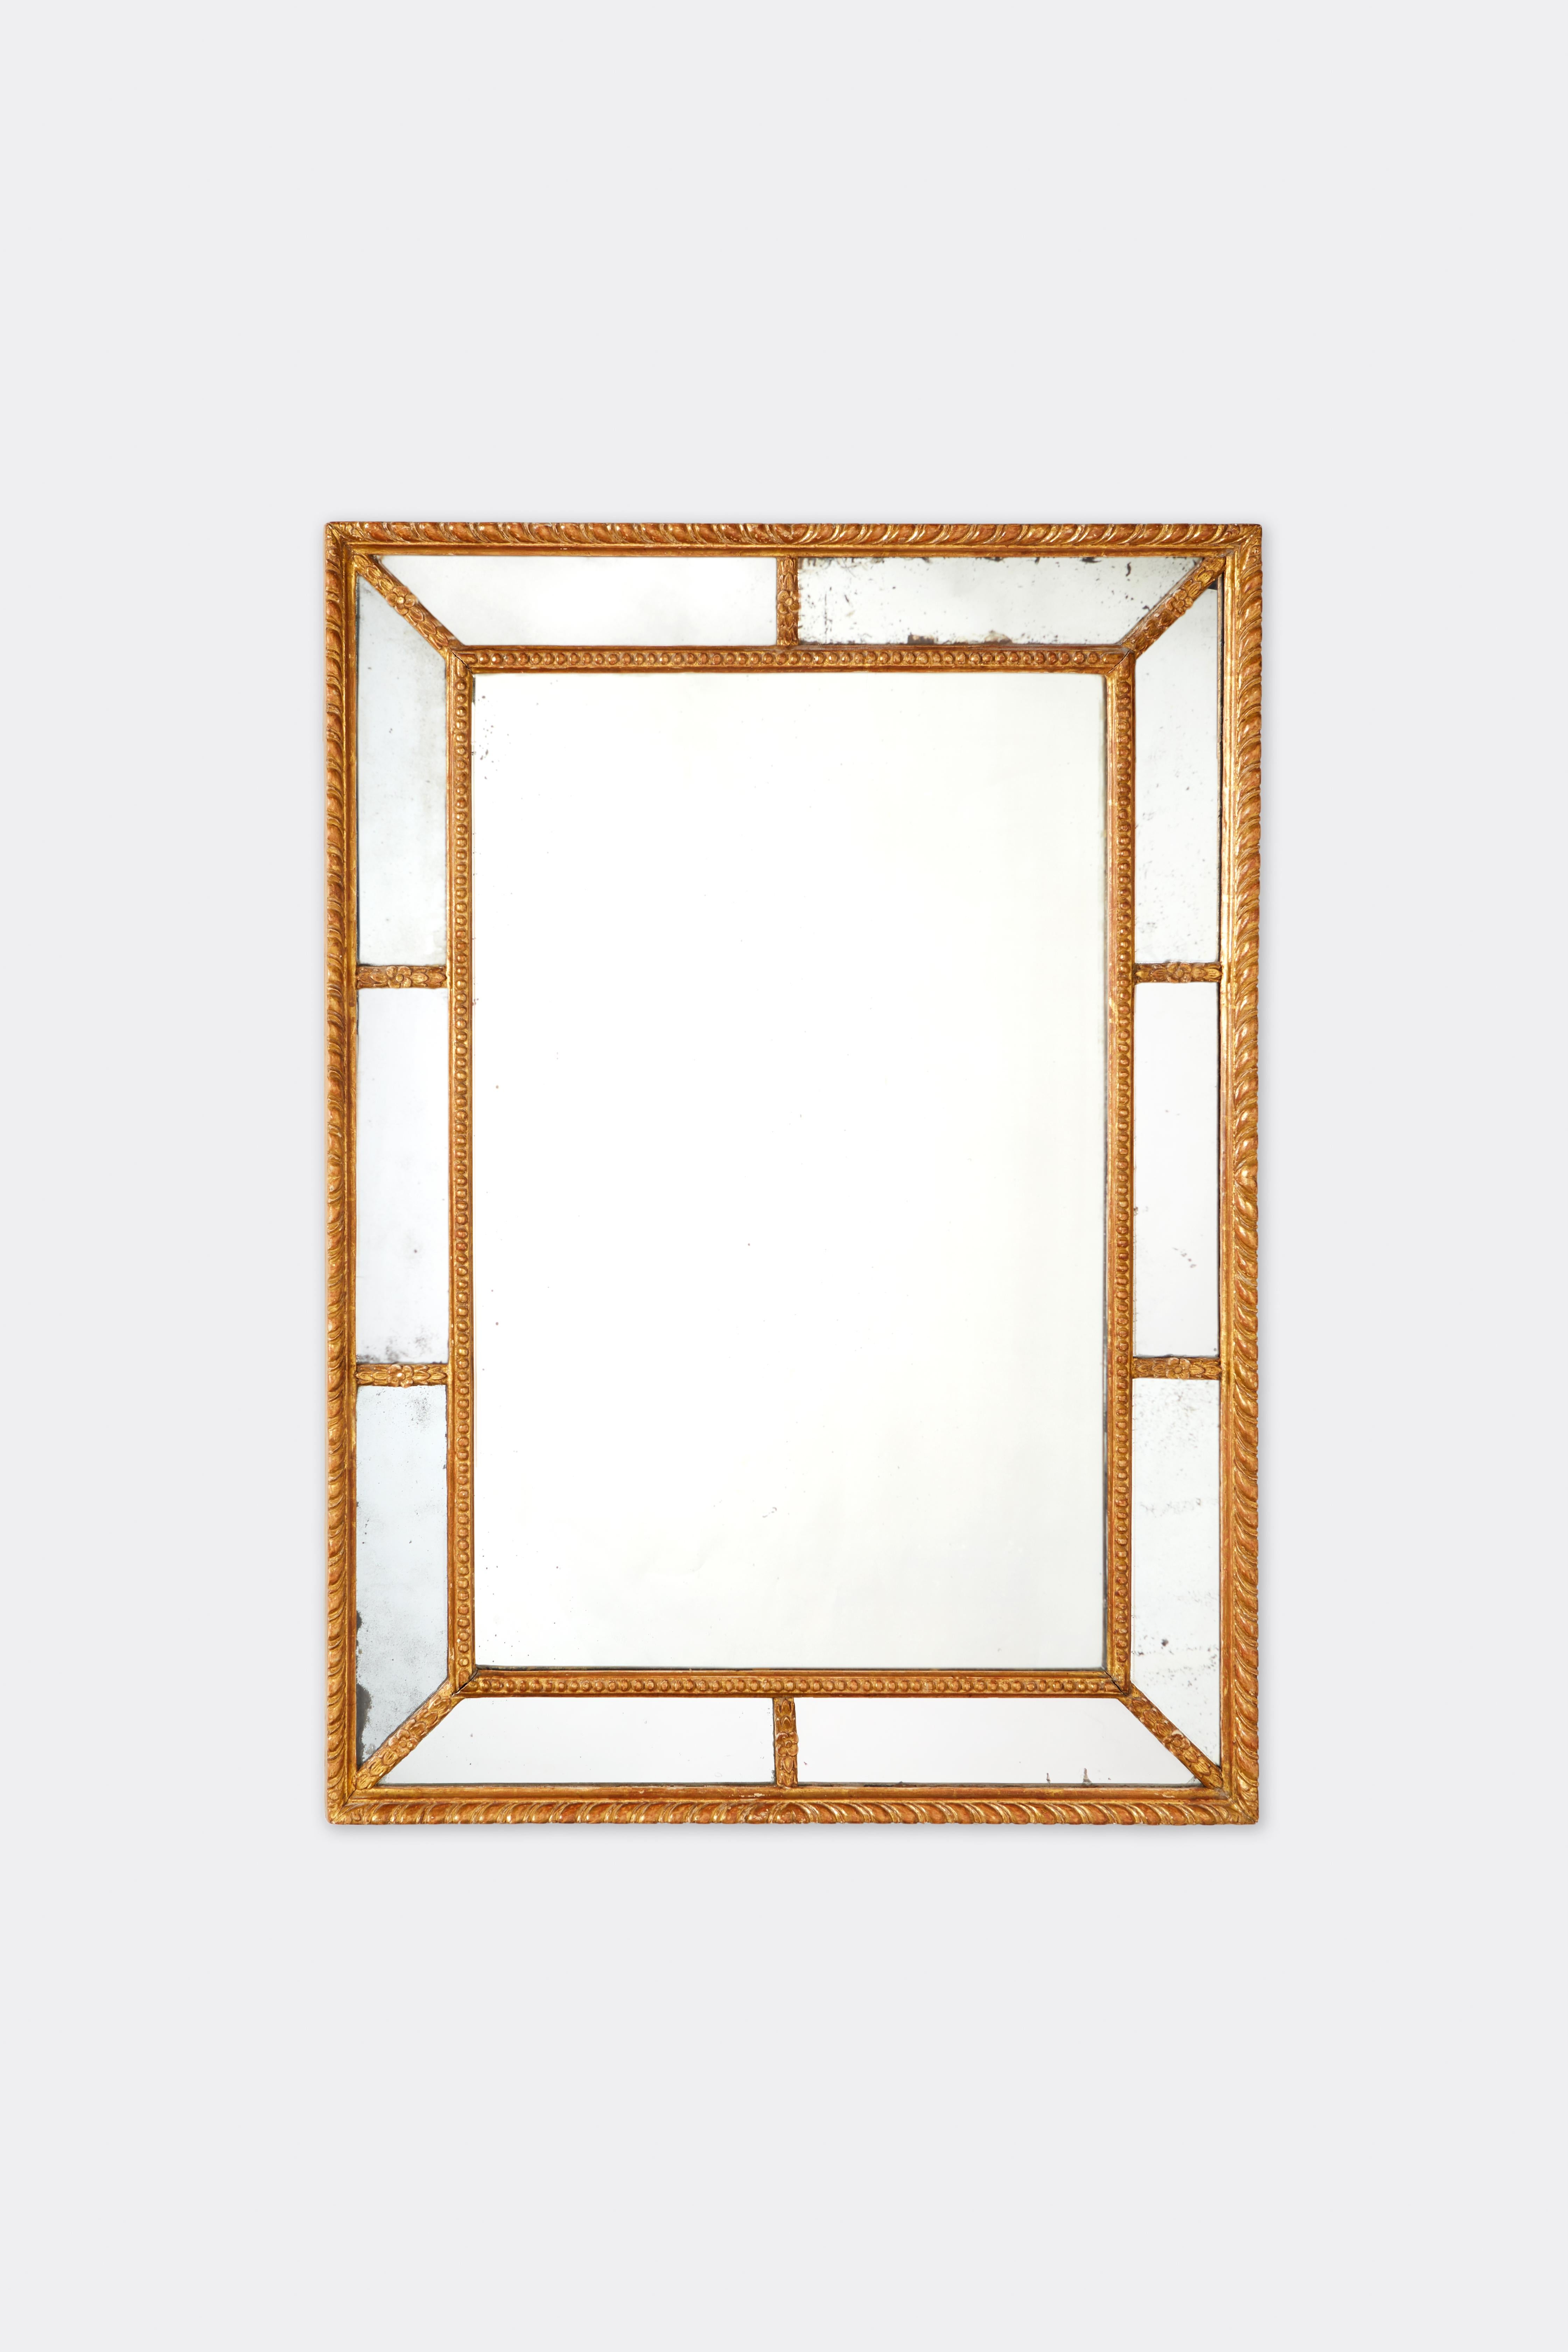 A fine 18th-century Georgian rectangular mirror with mirrored sections in frame, and carved giltwood details including granulation, rosettes, and twist motifs.